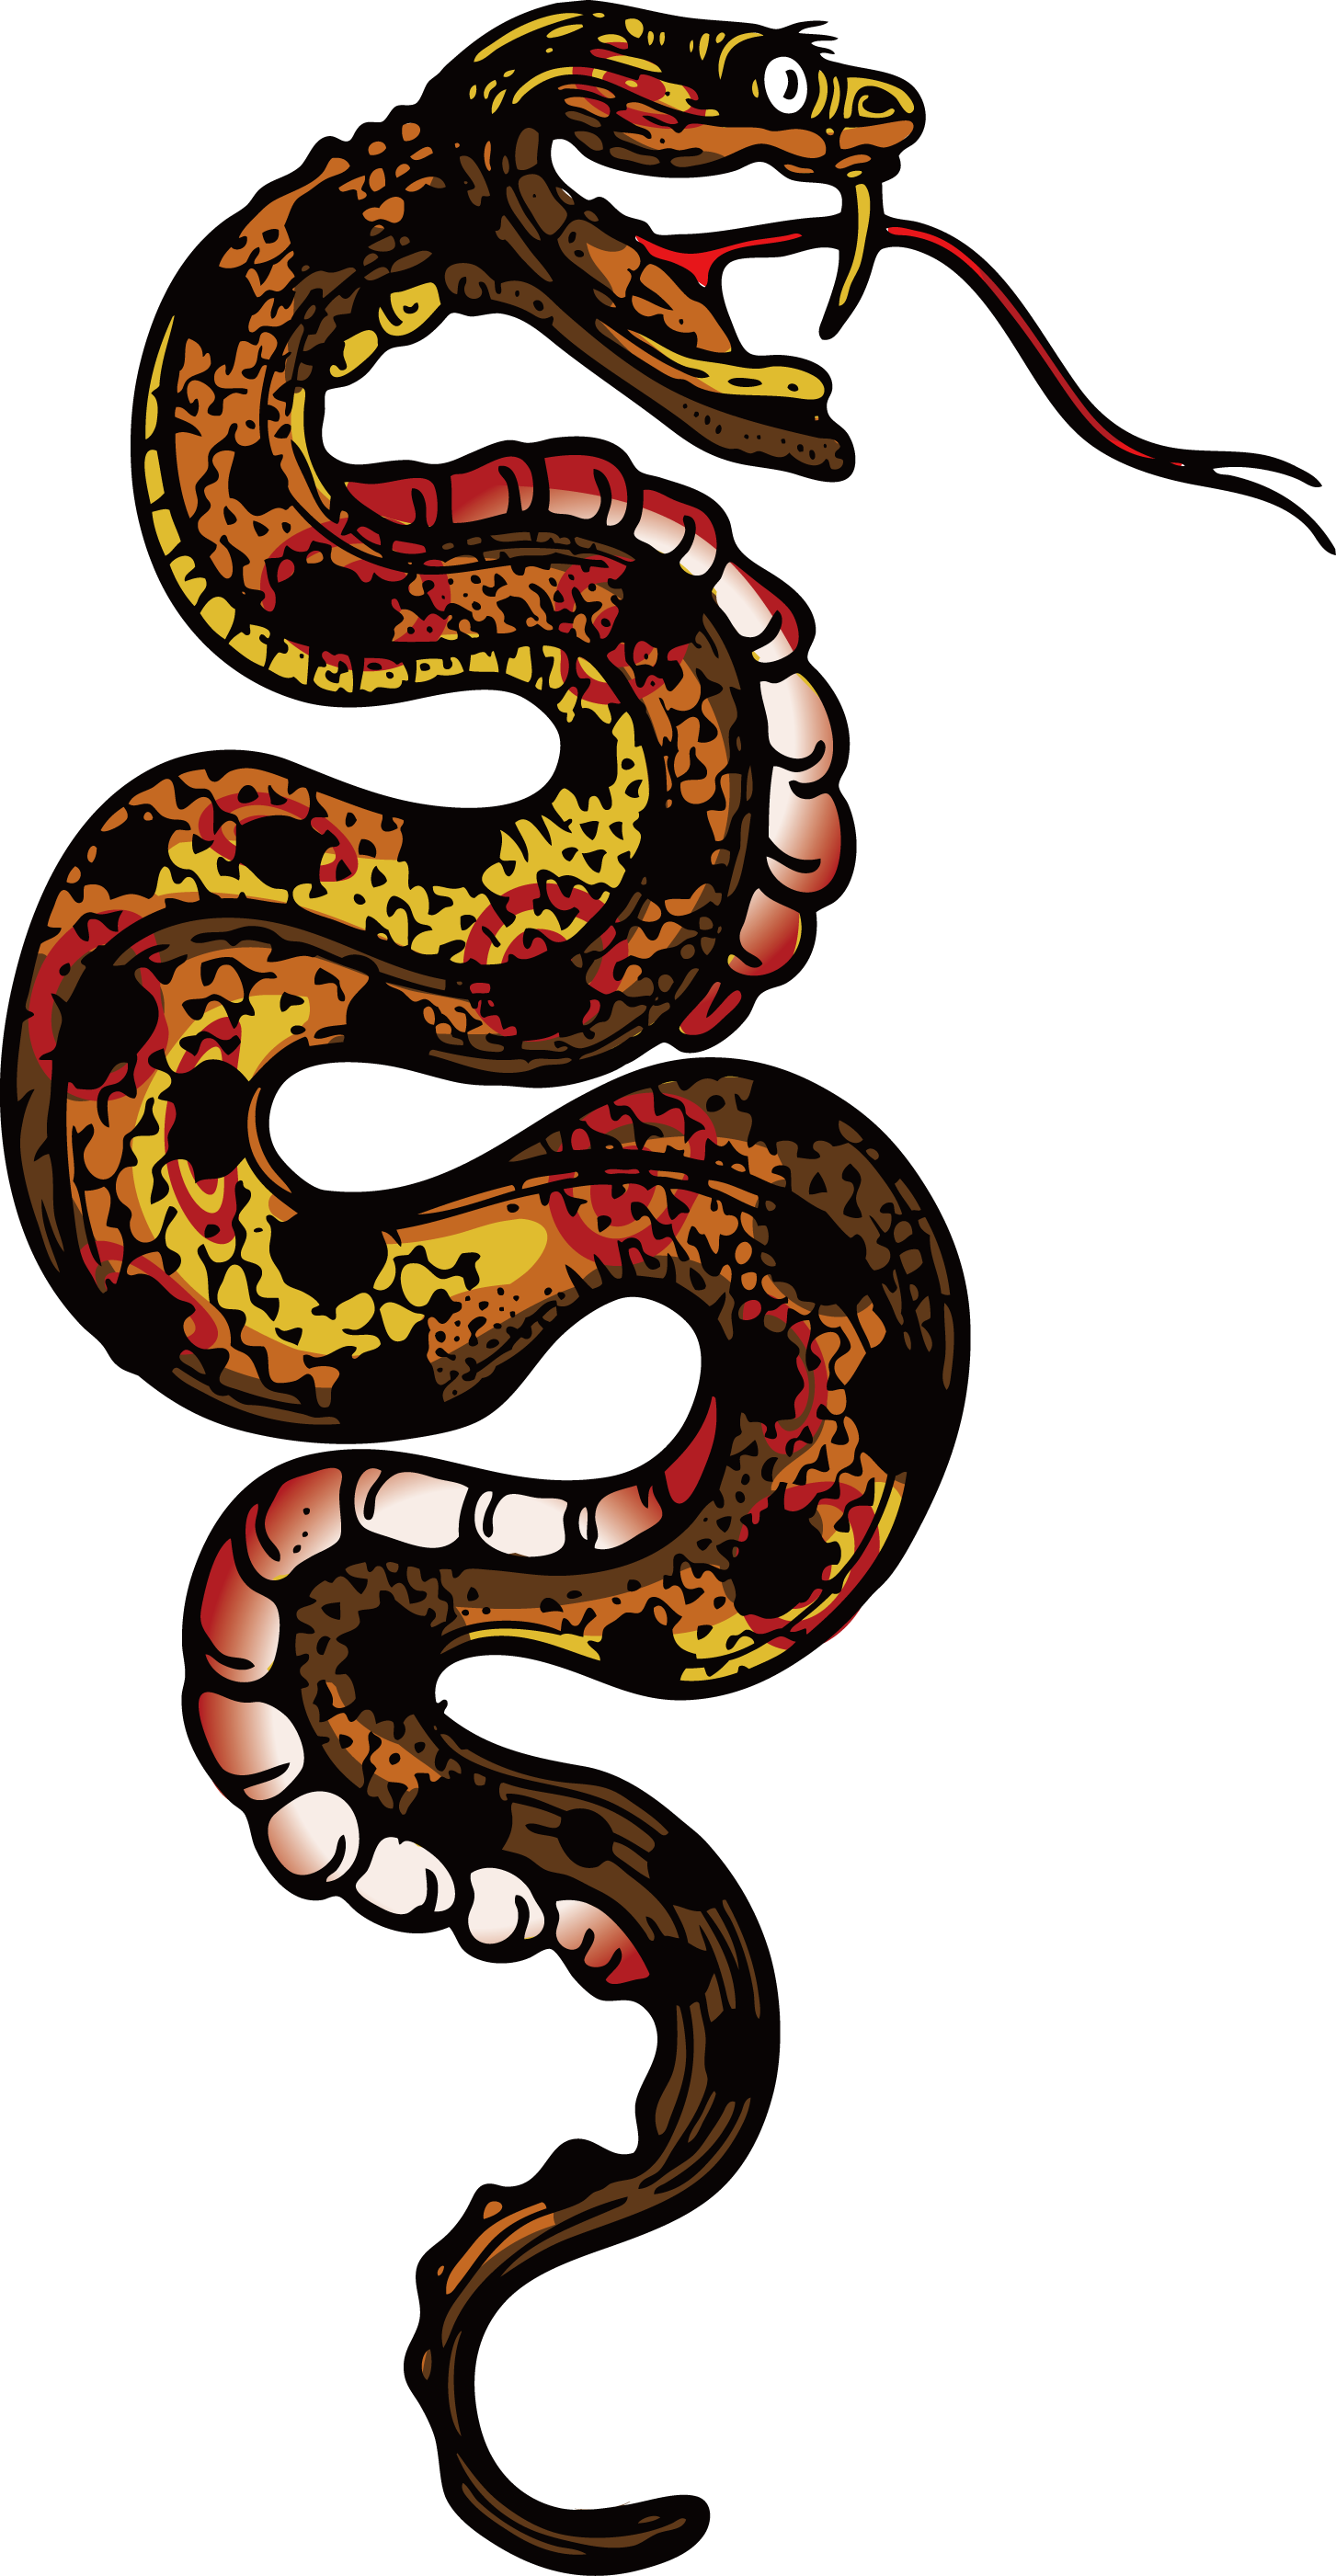 Boa Constrictor Vipers Kingsnakes - Snakes (1453x2802)